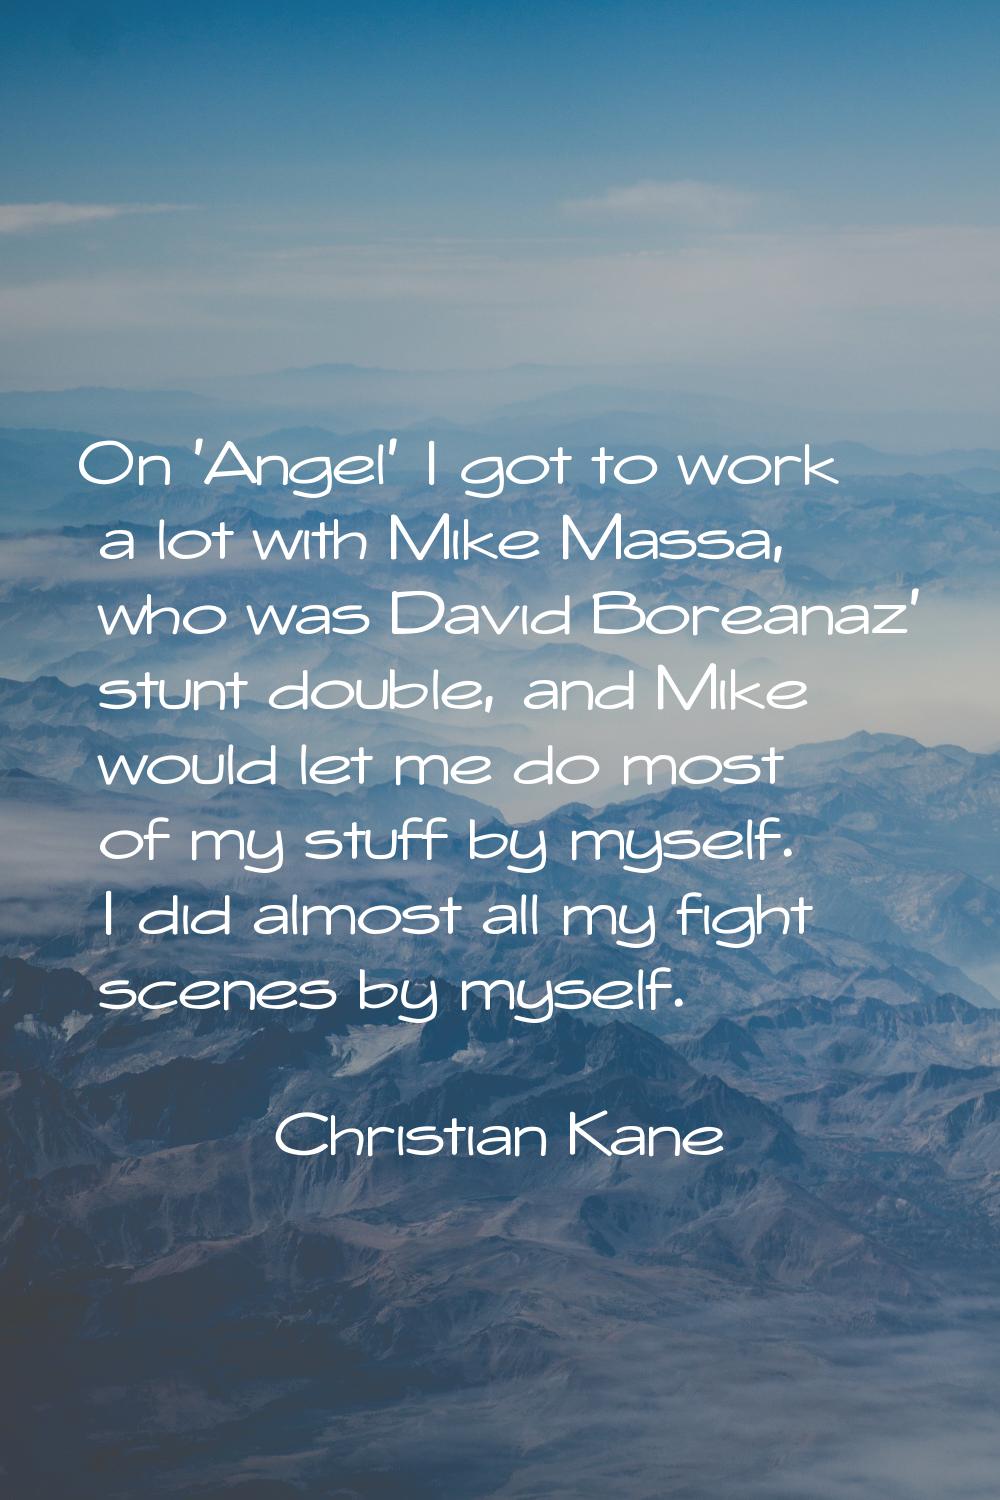 On 'Angel' I got to work a lot with Mike Massa, who was David Boreanaz' stunt double, and Mike woul